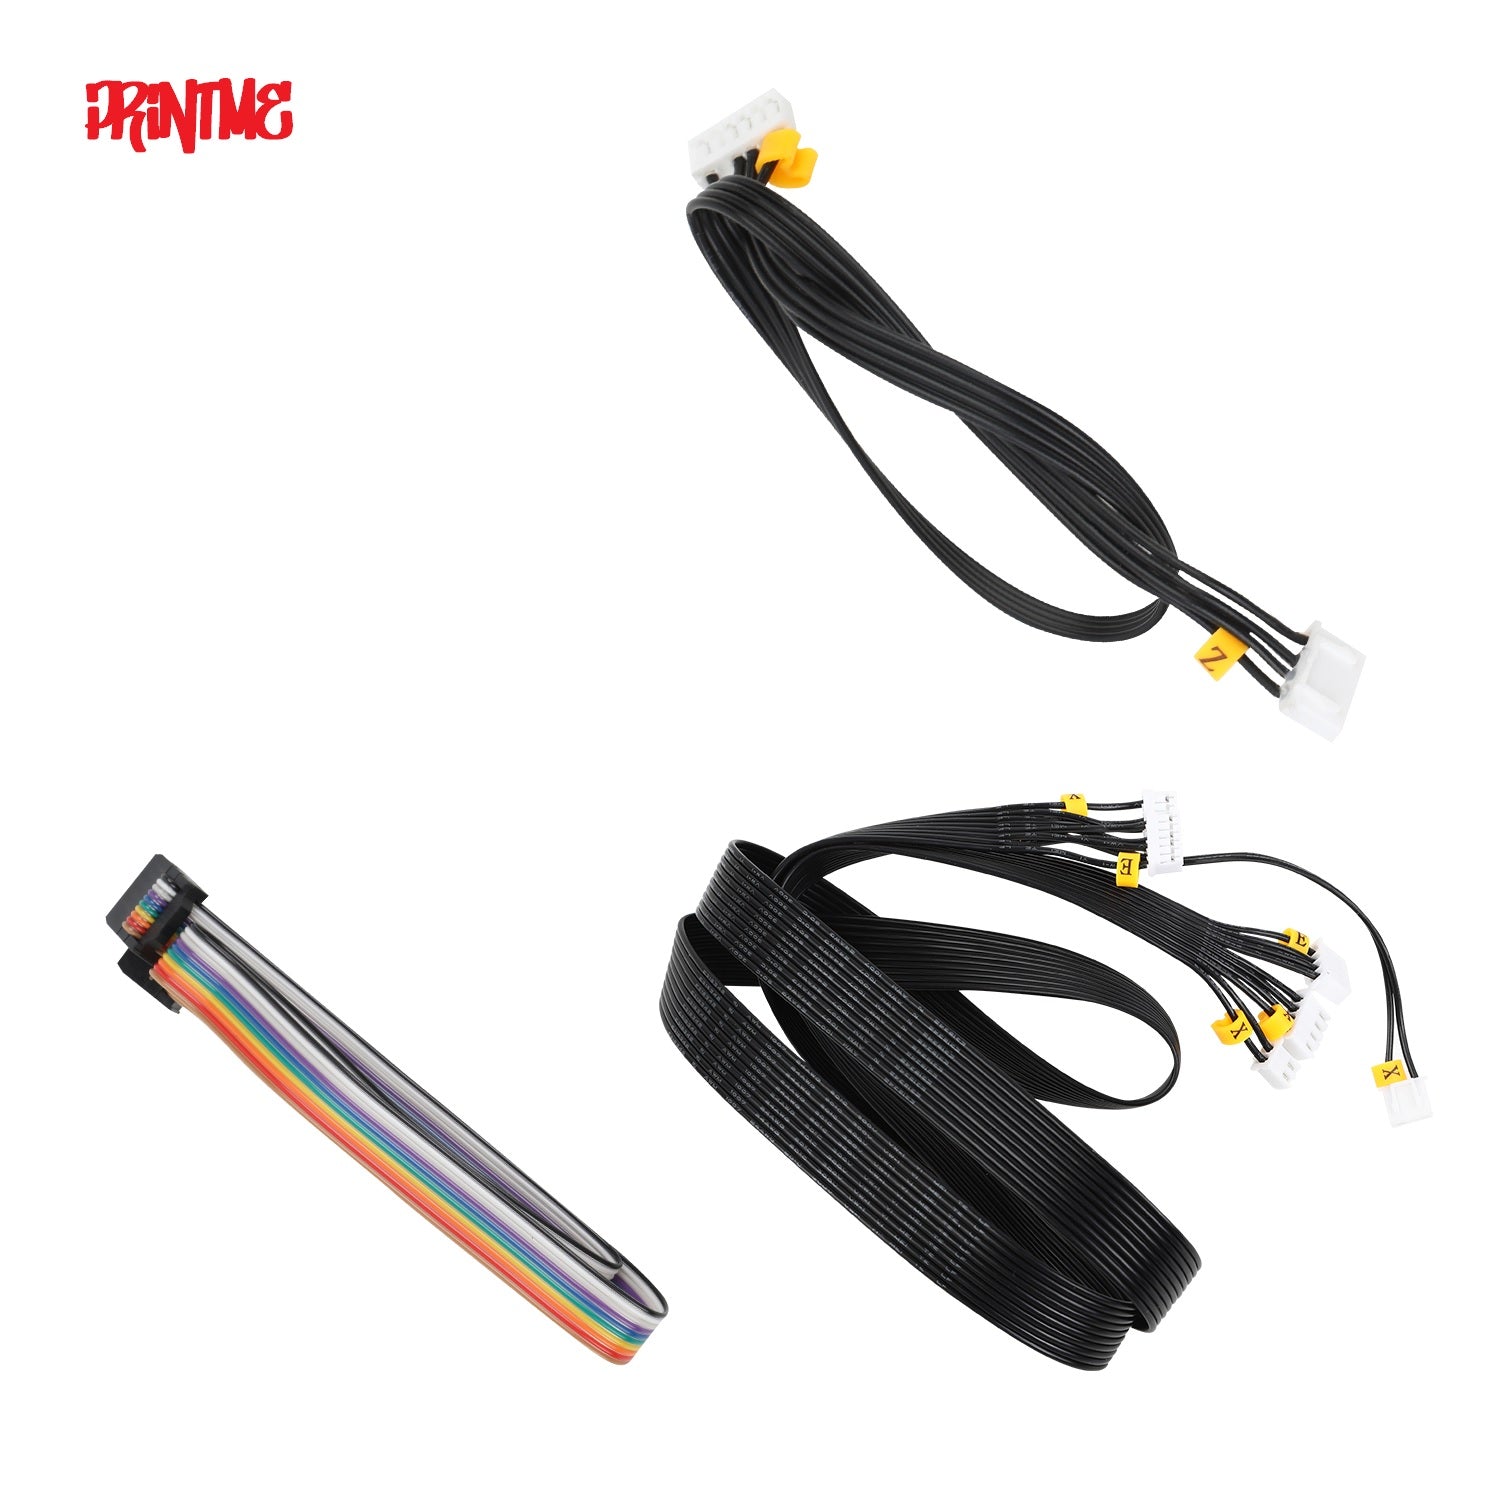 Creality 3D Ender 3 V2 Cable Pack